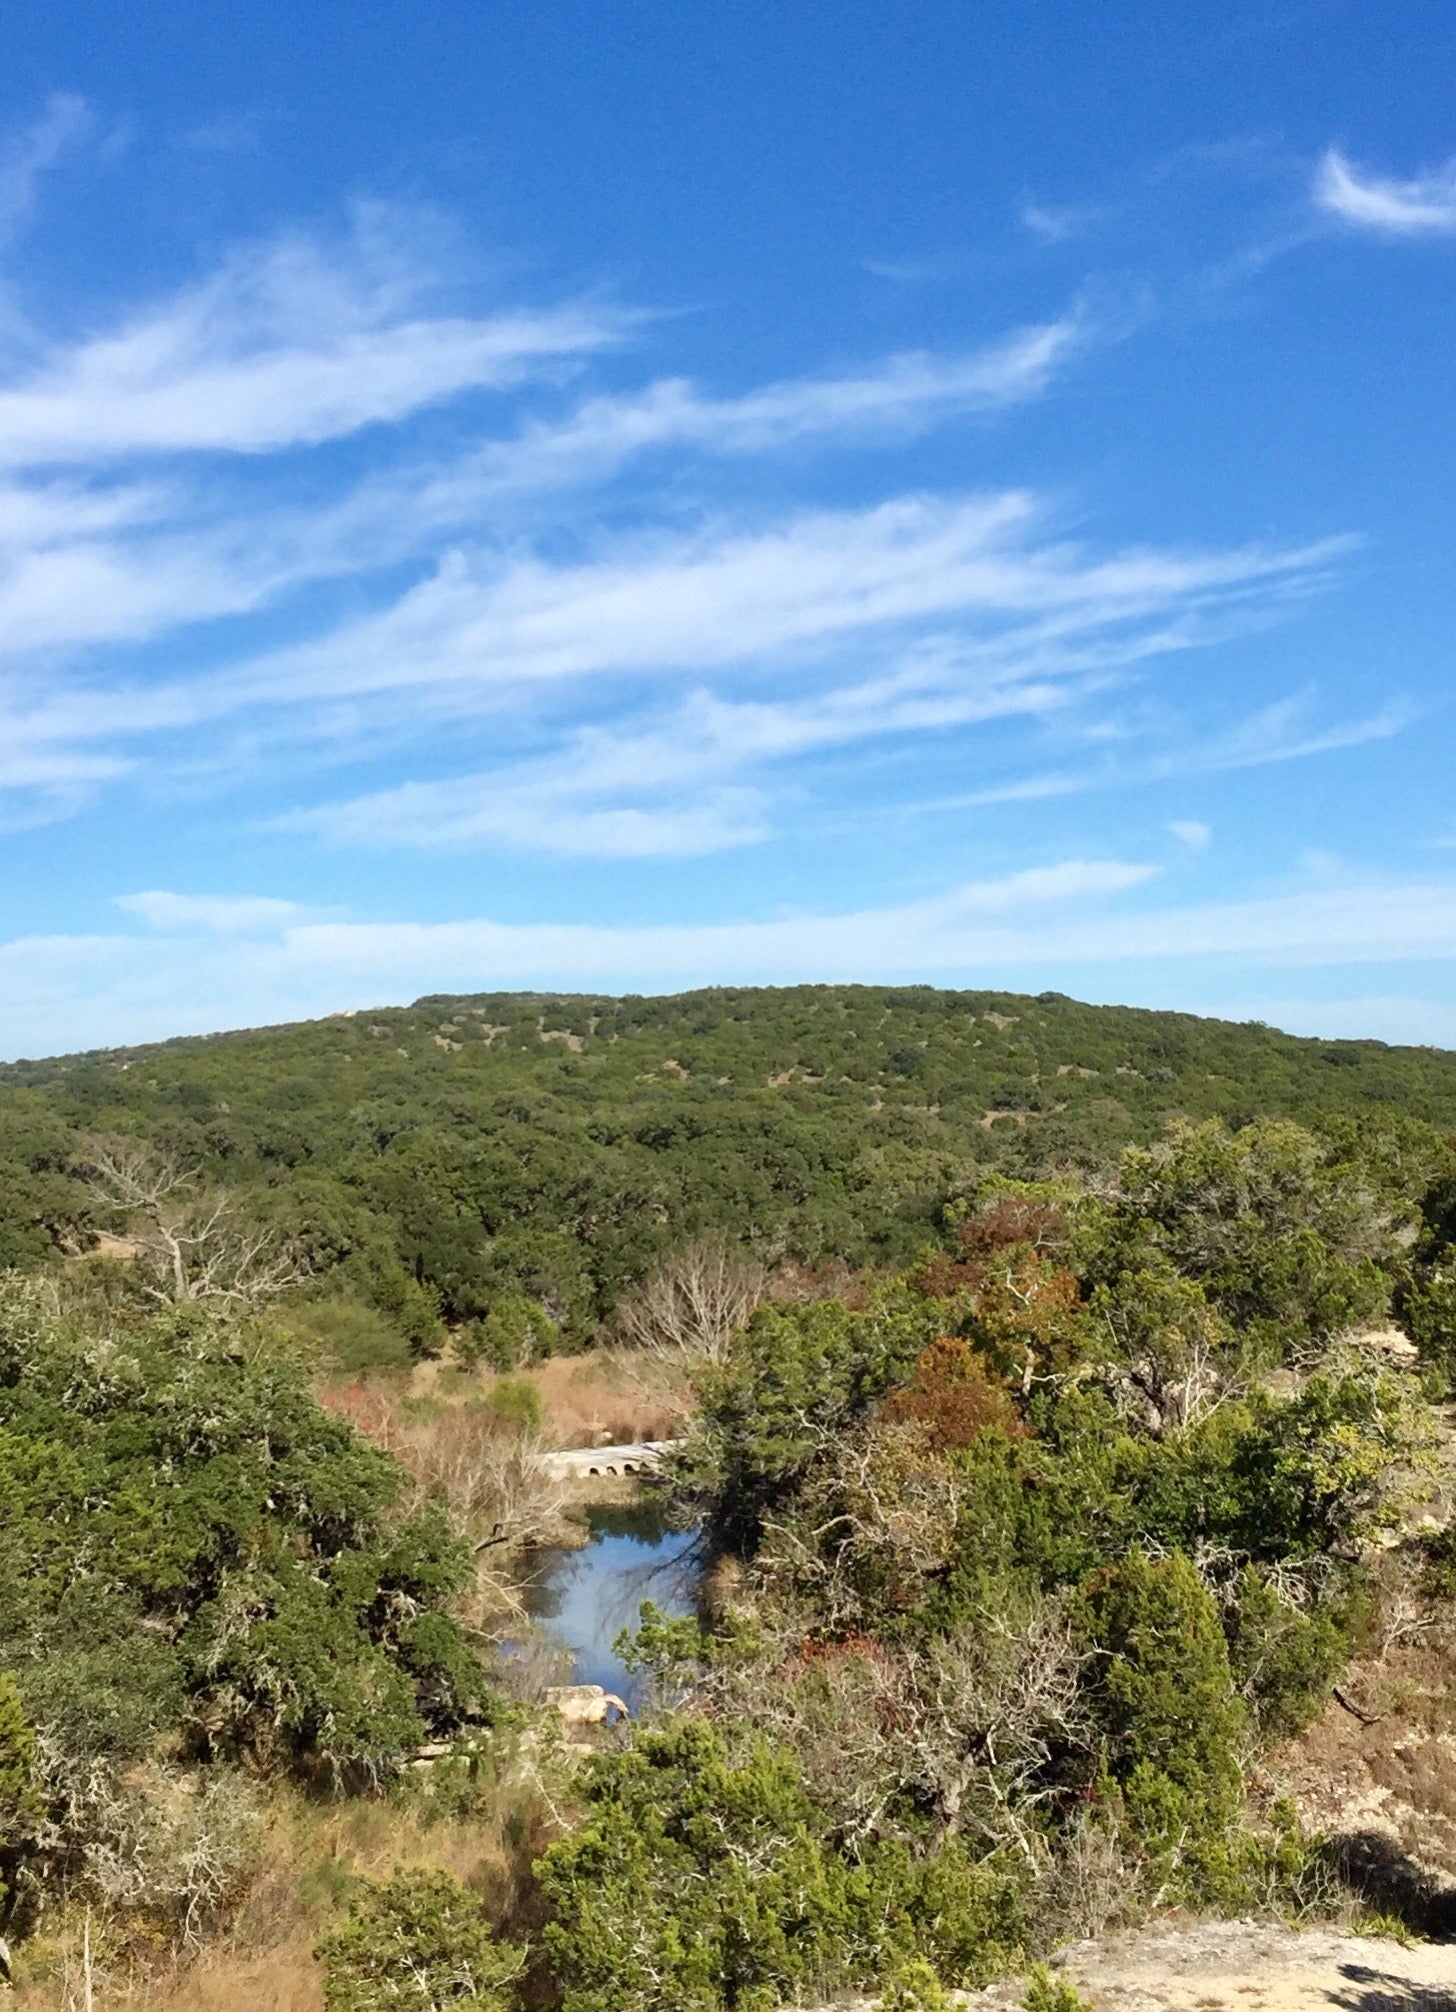 Camper submitted image from Hill Country State Natural Area - 5